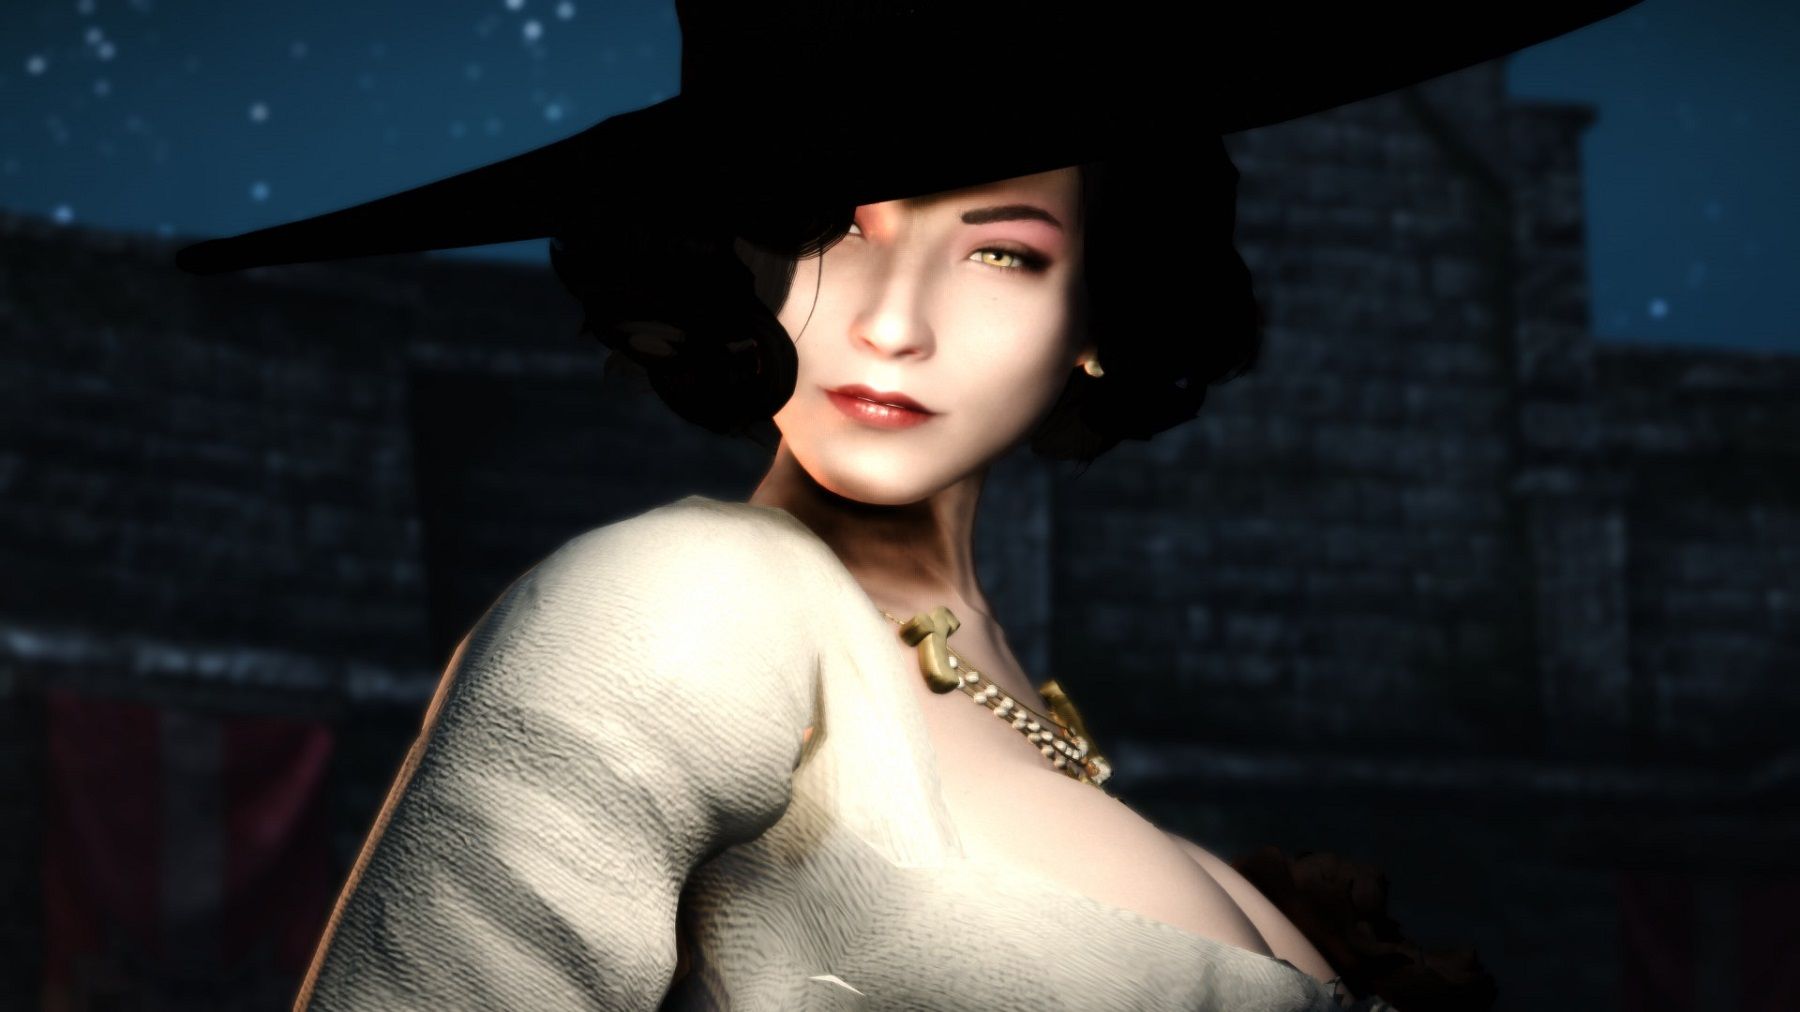 A screenshot from Skyrim showing Lady D as a fan-made character in the game.